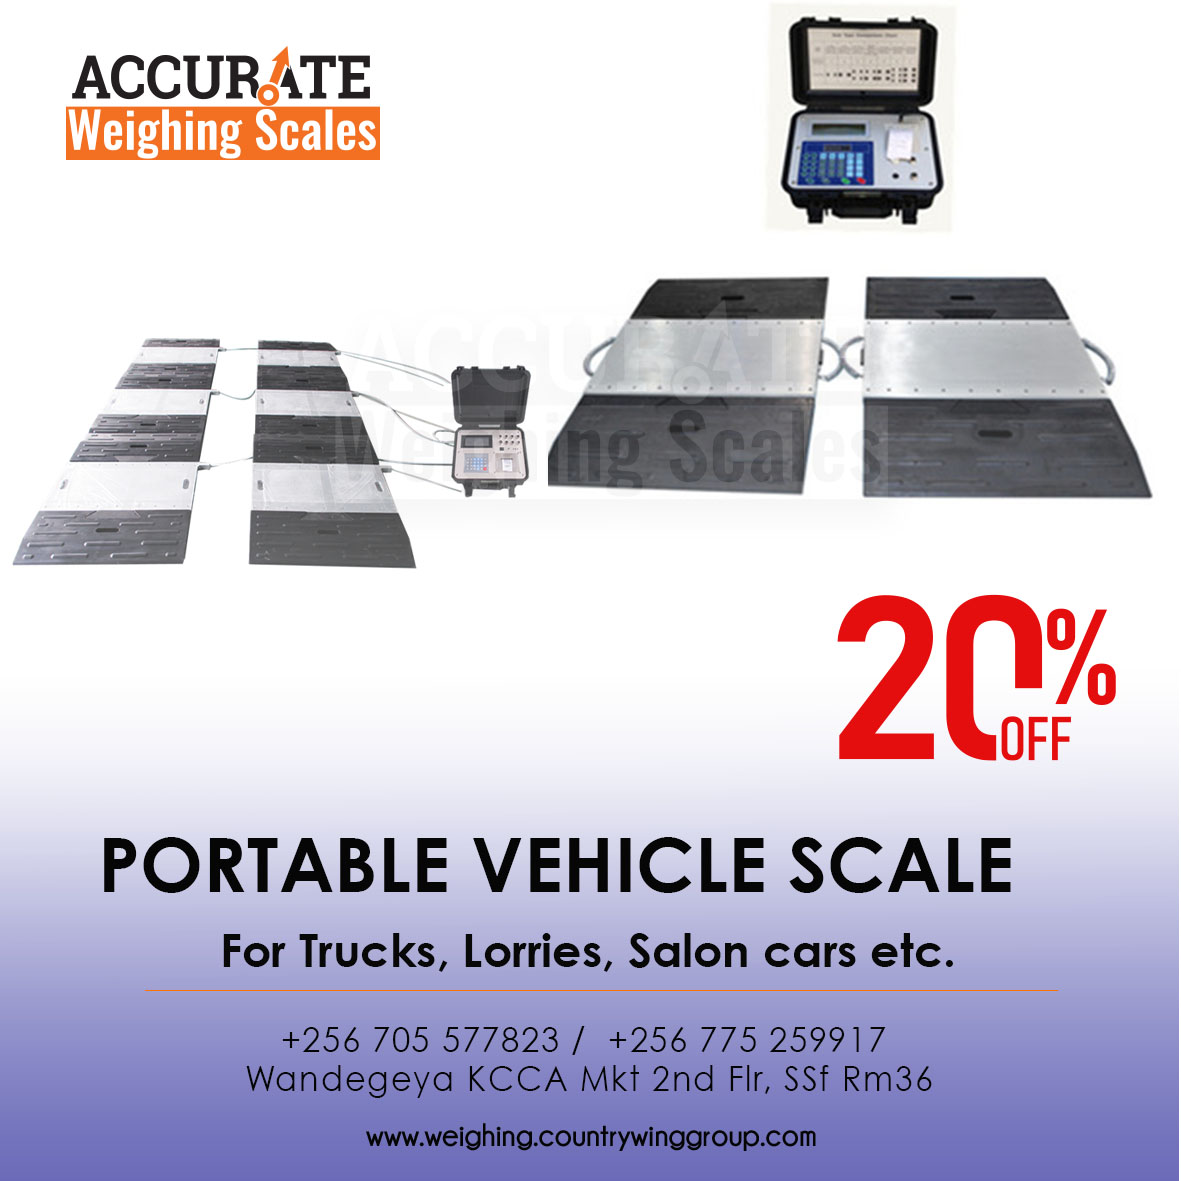 Accurate Truck Axle Scales In Uganda, Online Event